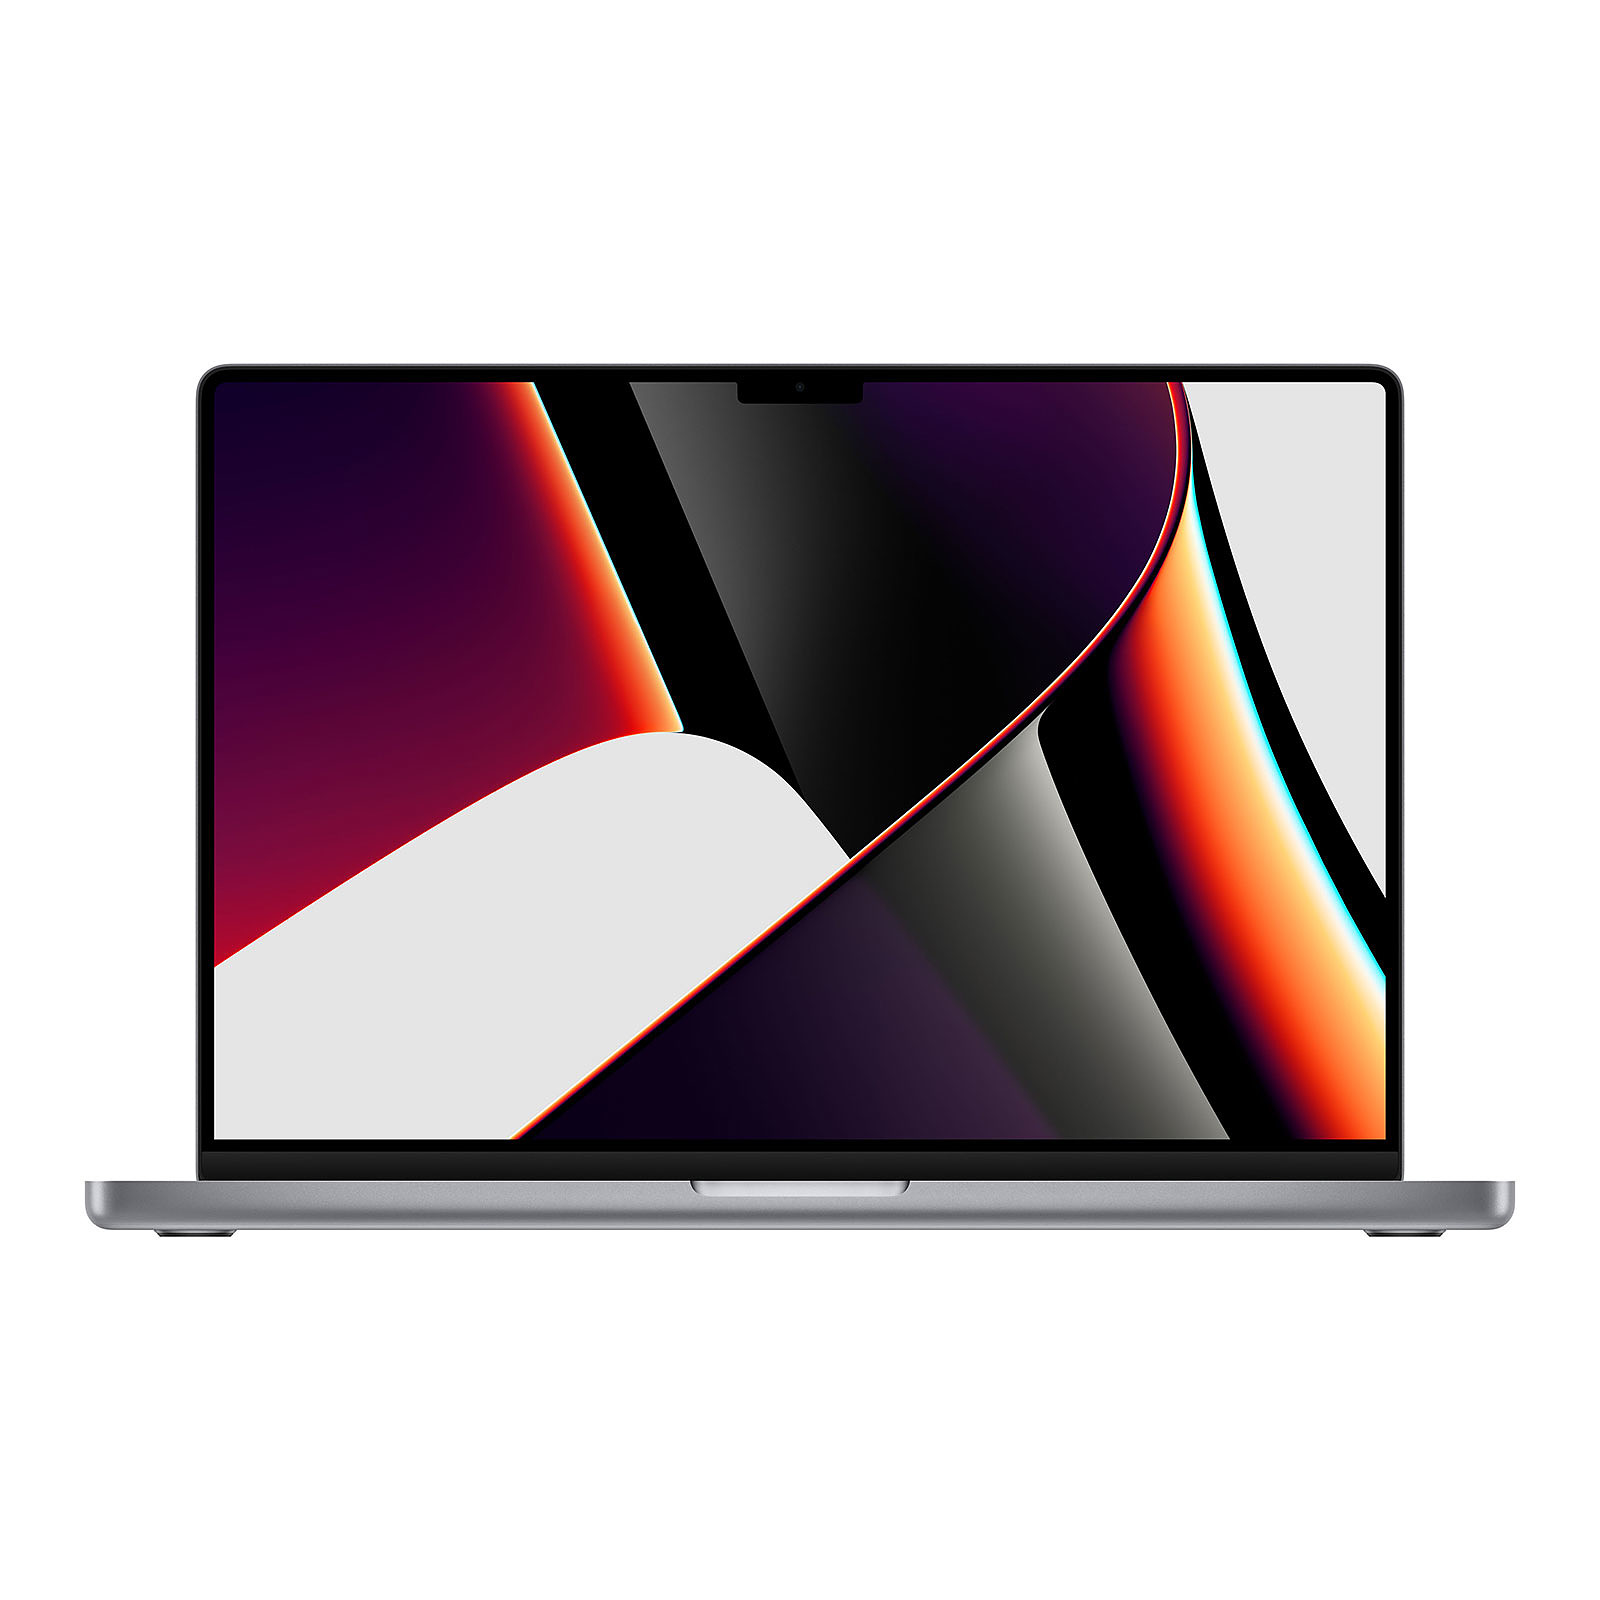 Apple MacBook Pro M1 Max (2021) 16" Gris sideral 64Go/2To (MK183FN/A-M1MAX-64GB-2TB) - MacBook Apple